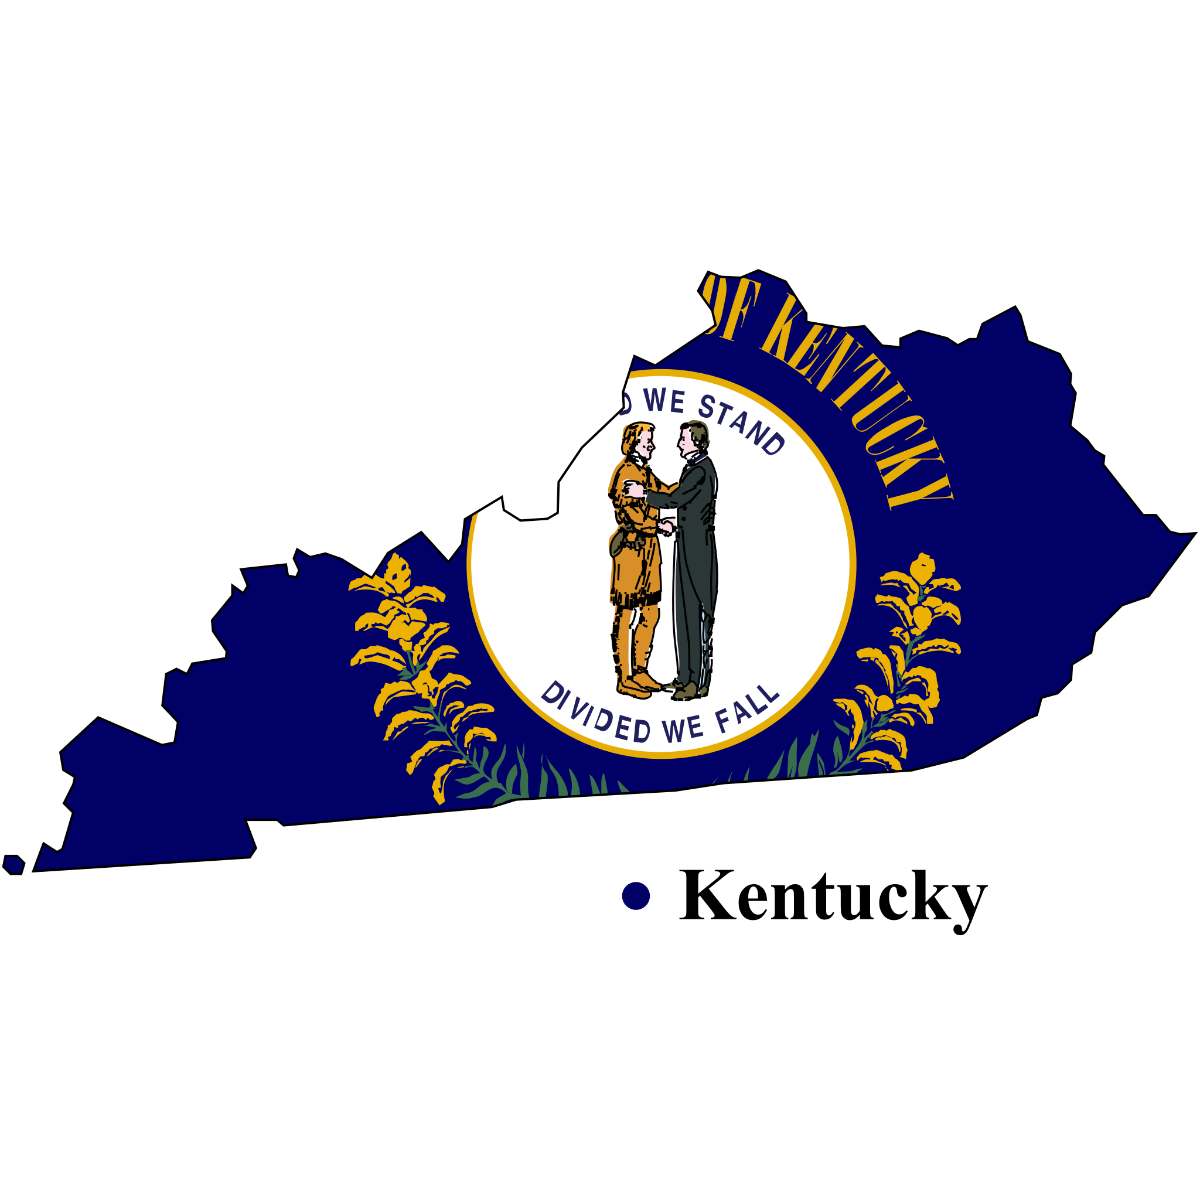 Kentucky State map cutout with Kentucky flag superimposed